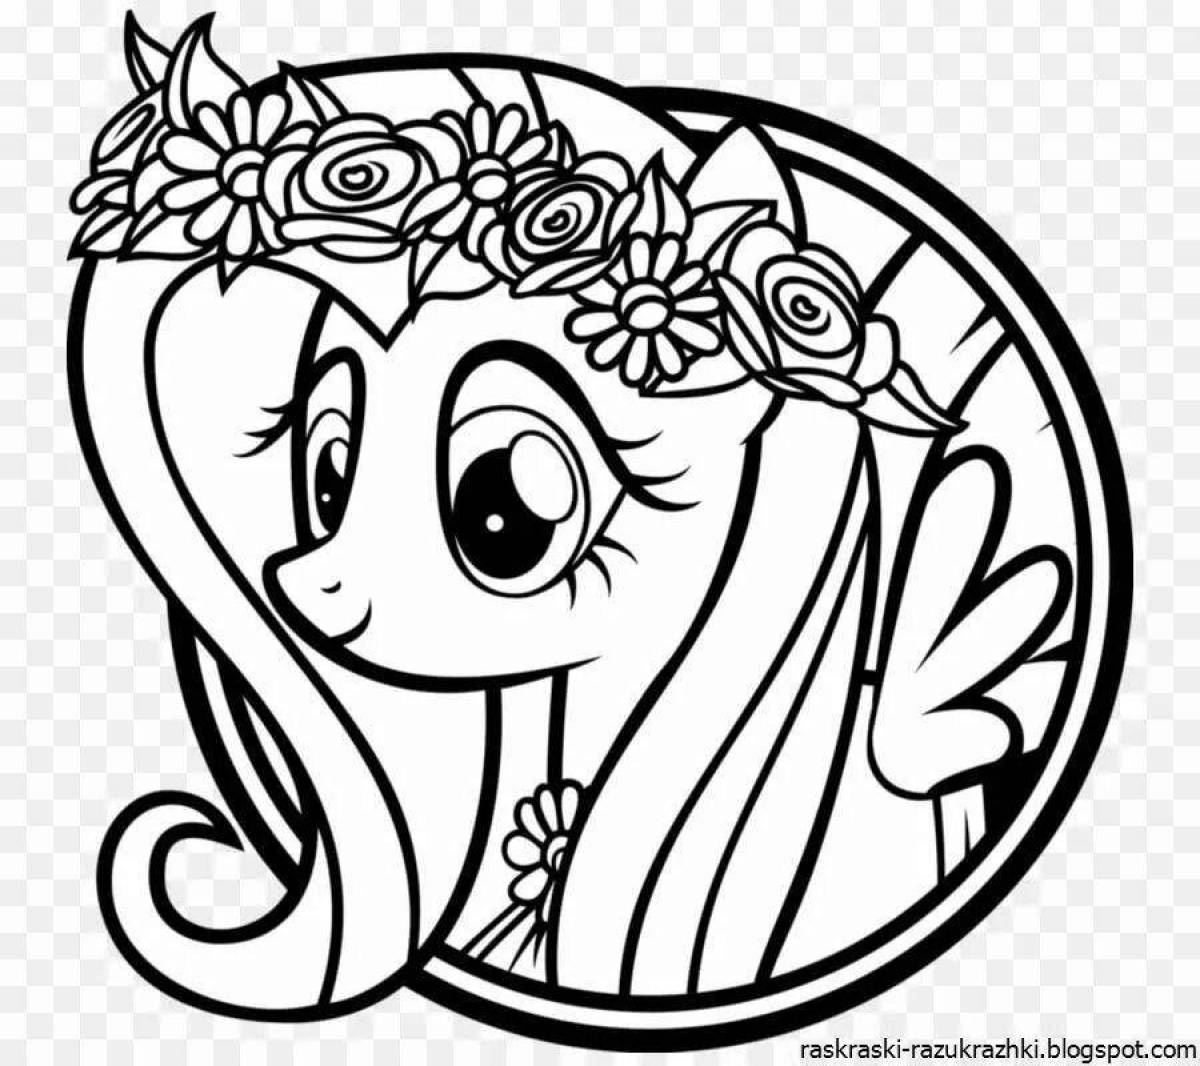 Coloring book for pony girls